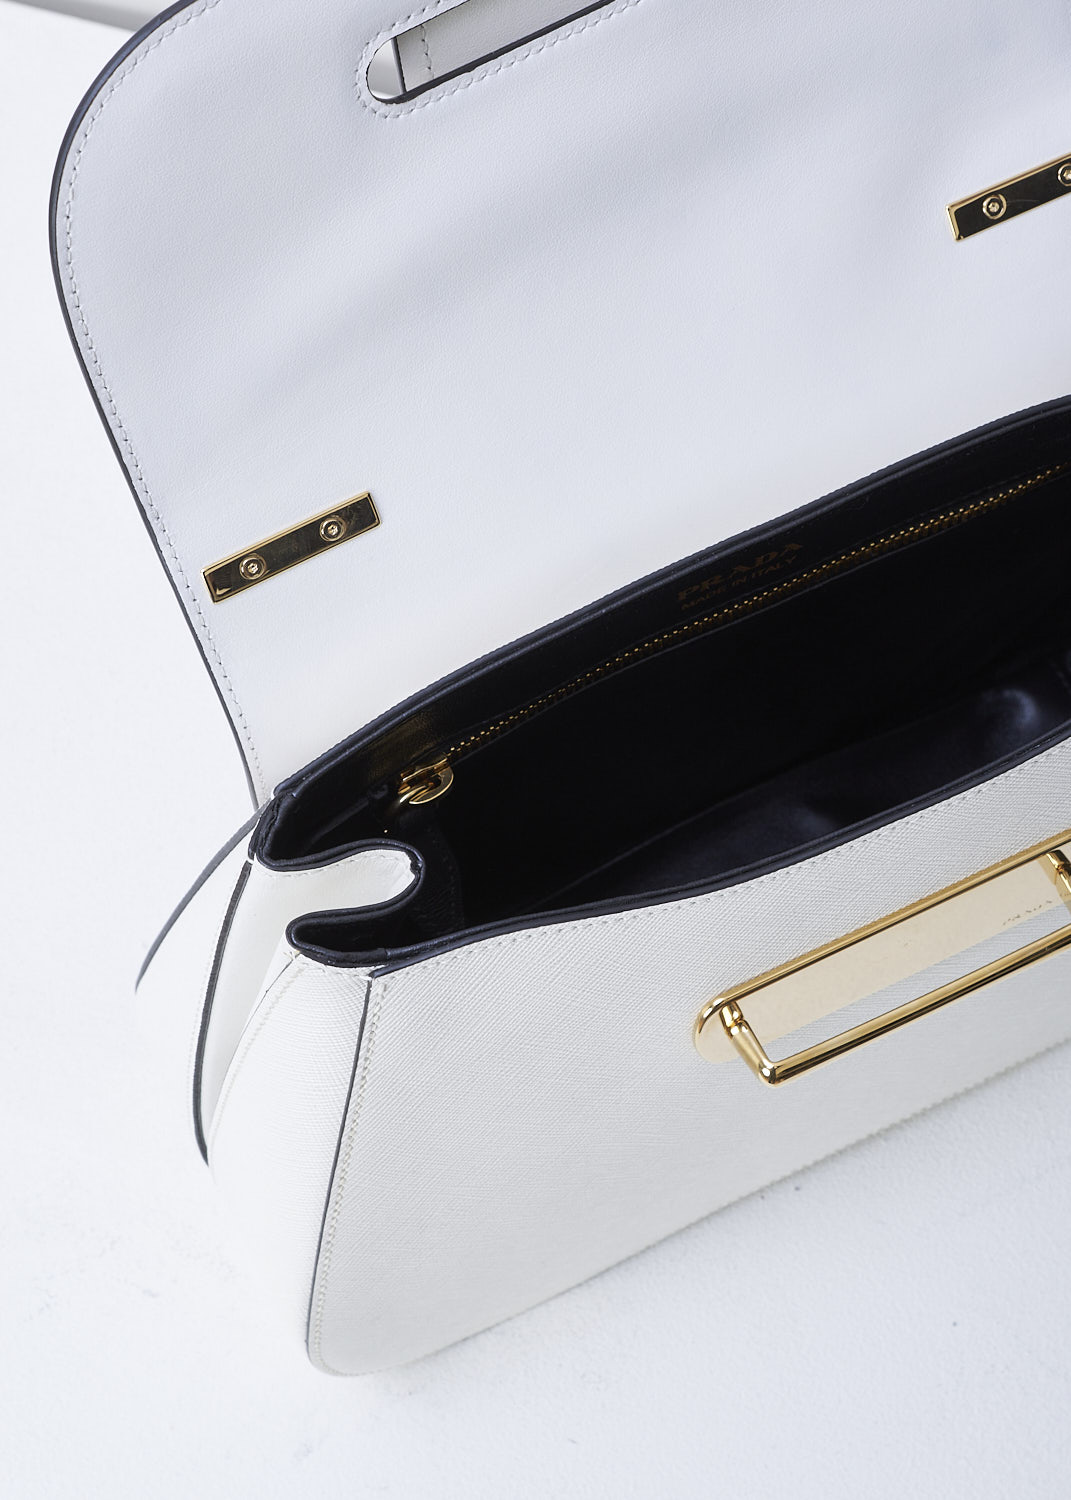 PRADA, MEDIUM SIDONIE TOP HANDLE BAG IN WHITE, CARTELLA_1BN005_F0009_BIANCO, White, Detail 1, This mid-sized white Sidonie Top Handle Bag is made with Saffiano leather. The bag comes with a leather handle and an adjustable and detachable shoulder strap. The bag has gold-tone metal hardware with the brand's logo on the back. The removable leather keychain has that same gold-tone logo on it. The slip-through closure opens up to reveal its black interior. The bag has a single, spacious compartment with a zipped inner pocket to one side and a patch pocket on the other side.  
